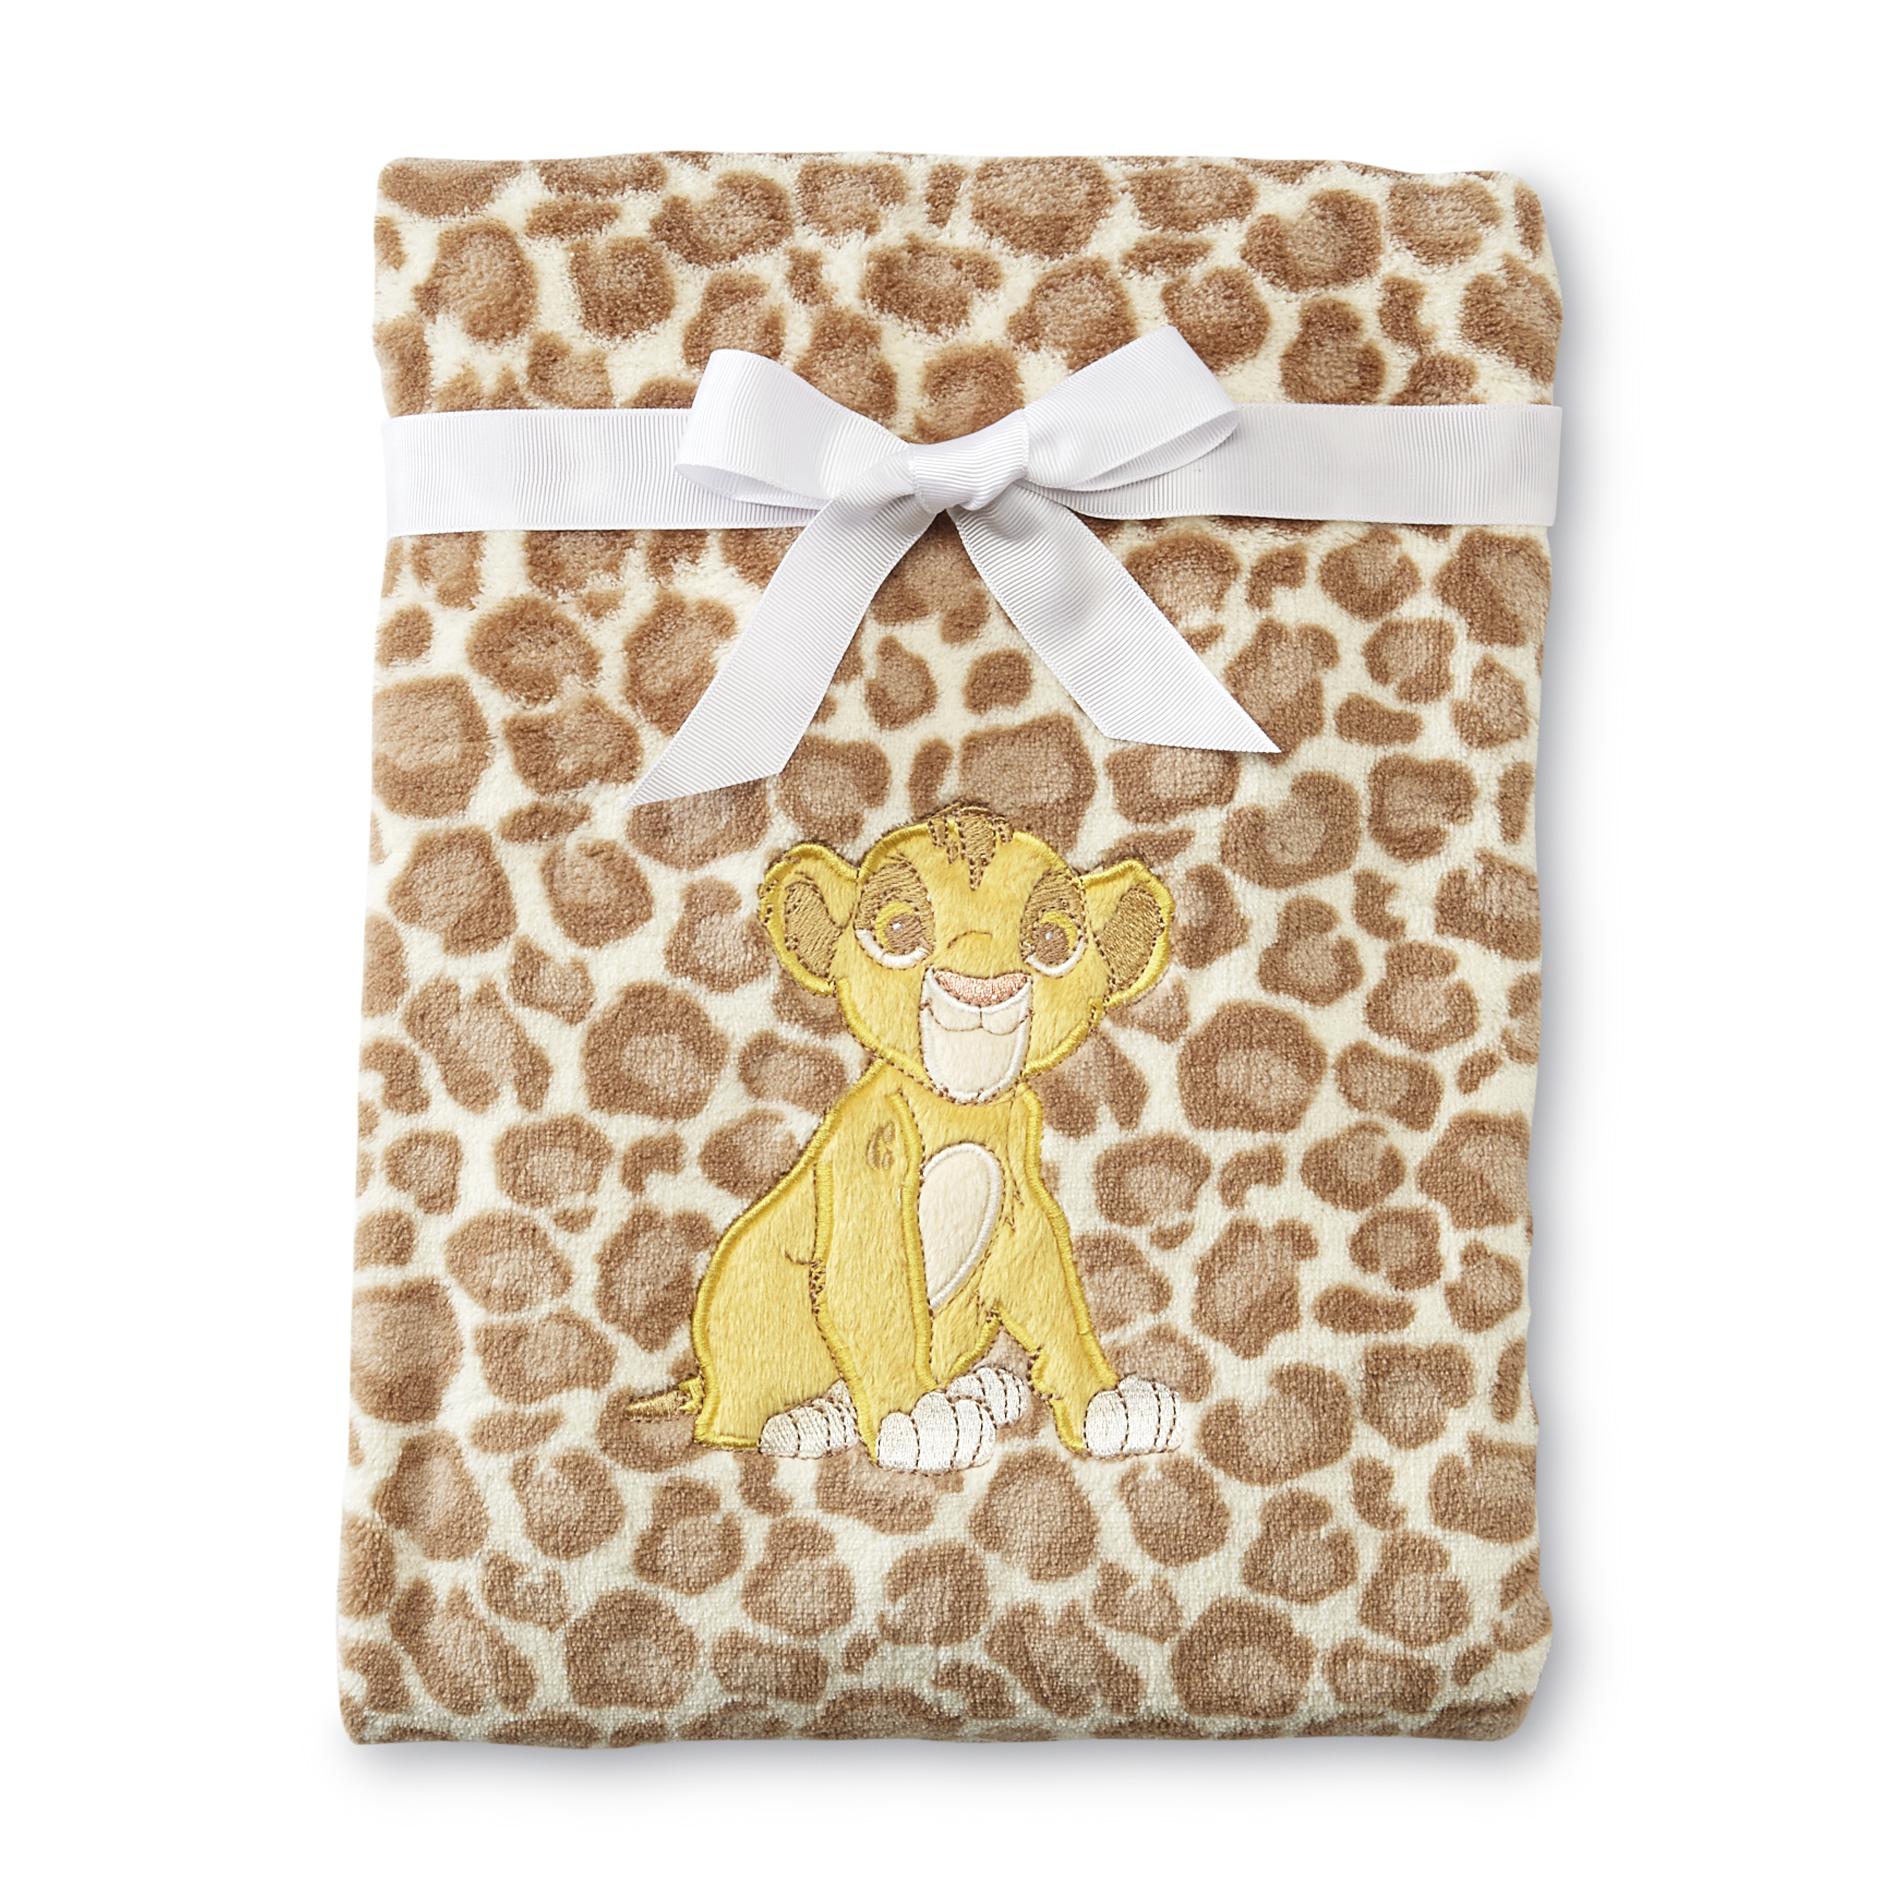 The Lion King Infant's Fuzzy Blanket